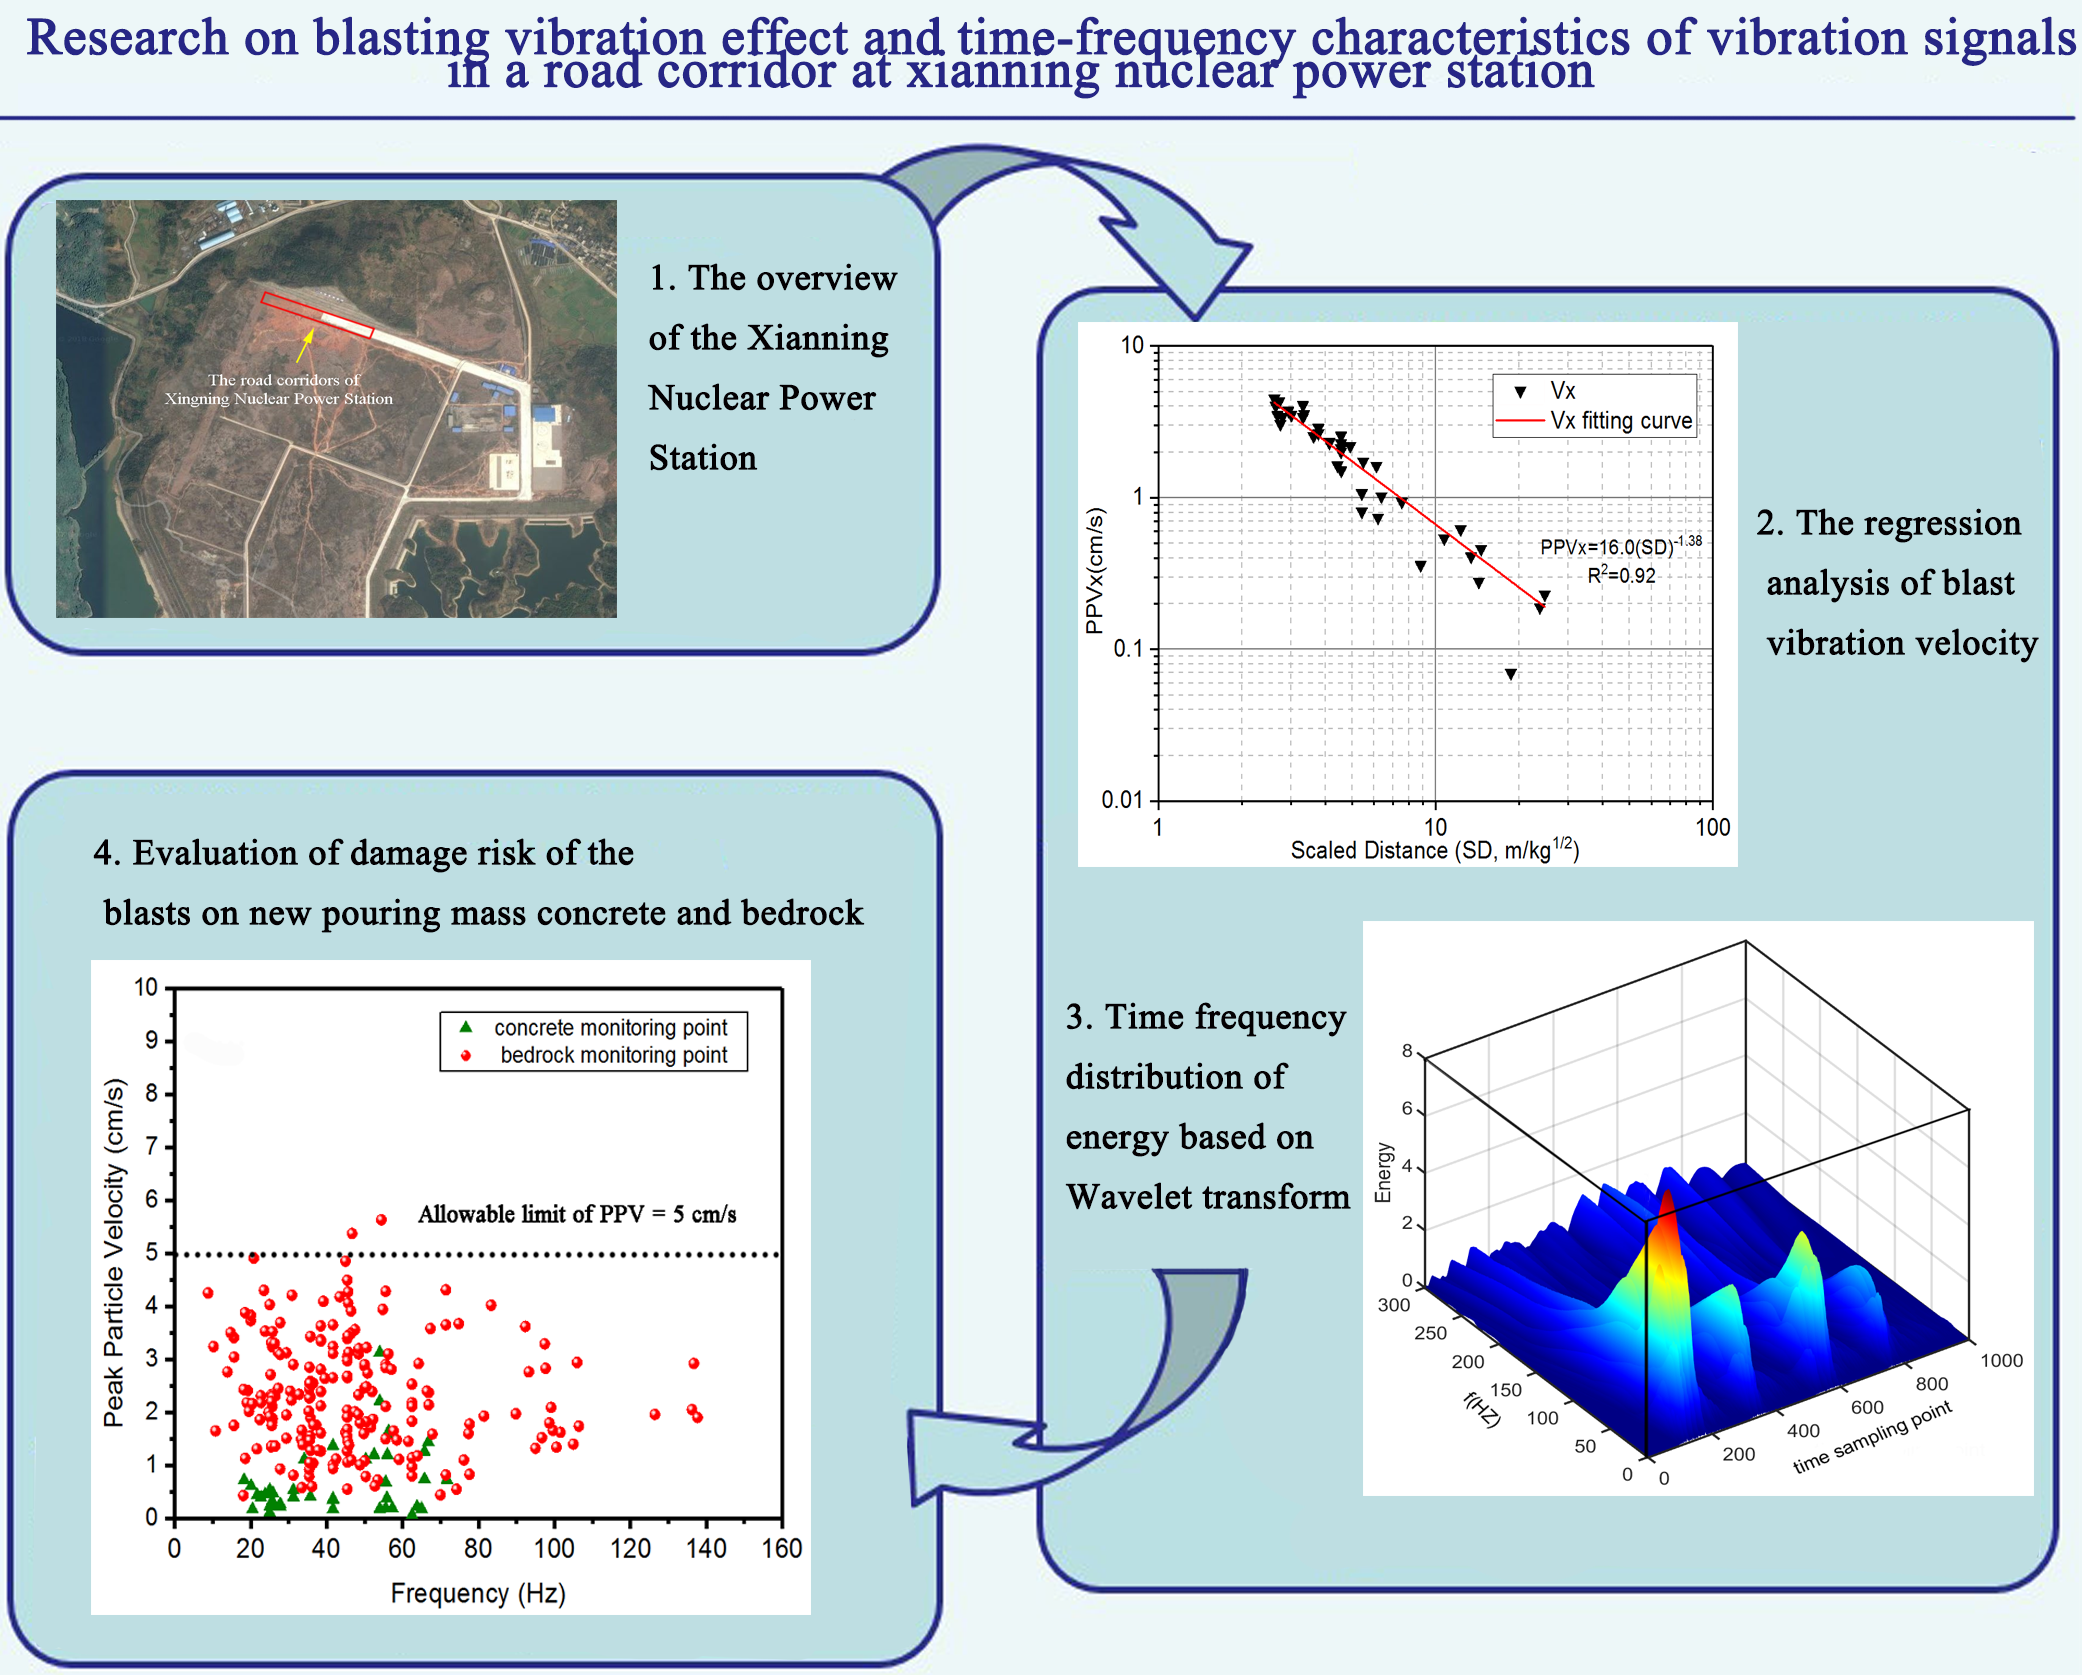 Research on blasting vibration effect and time-frequency characteristics of vibration signals in a road corridor at xianning nuclear power station